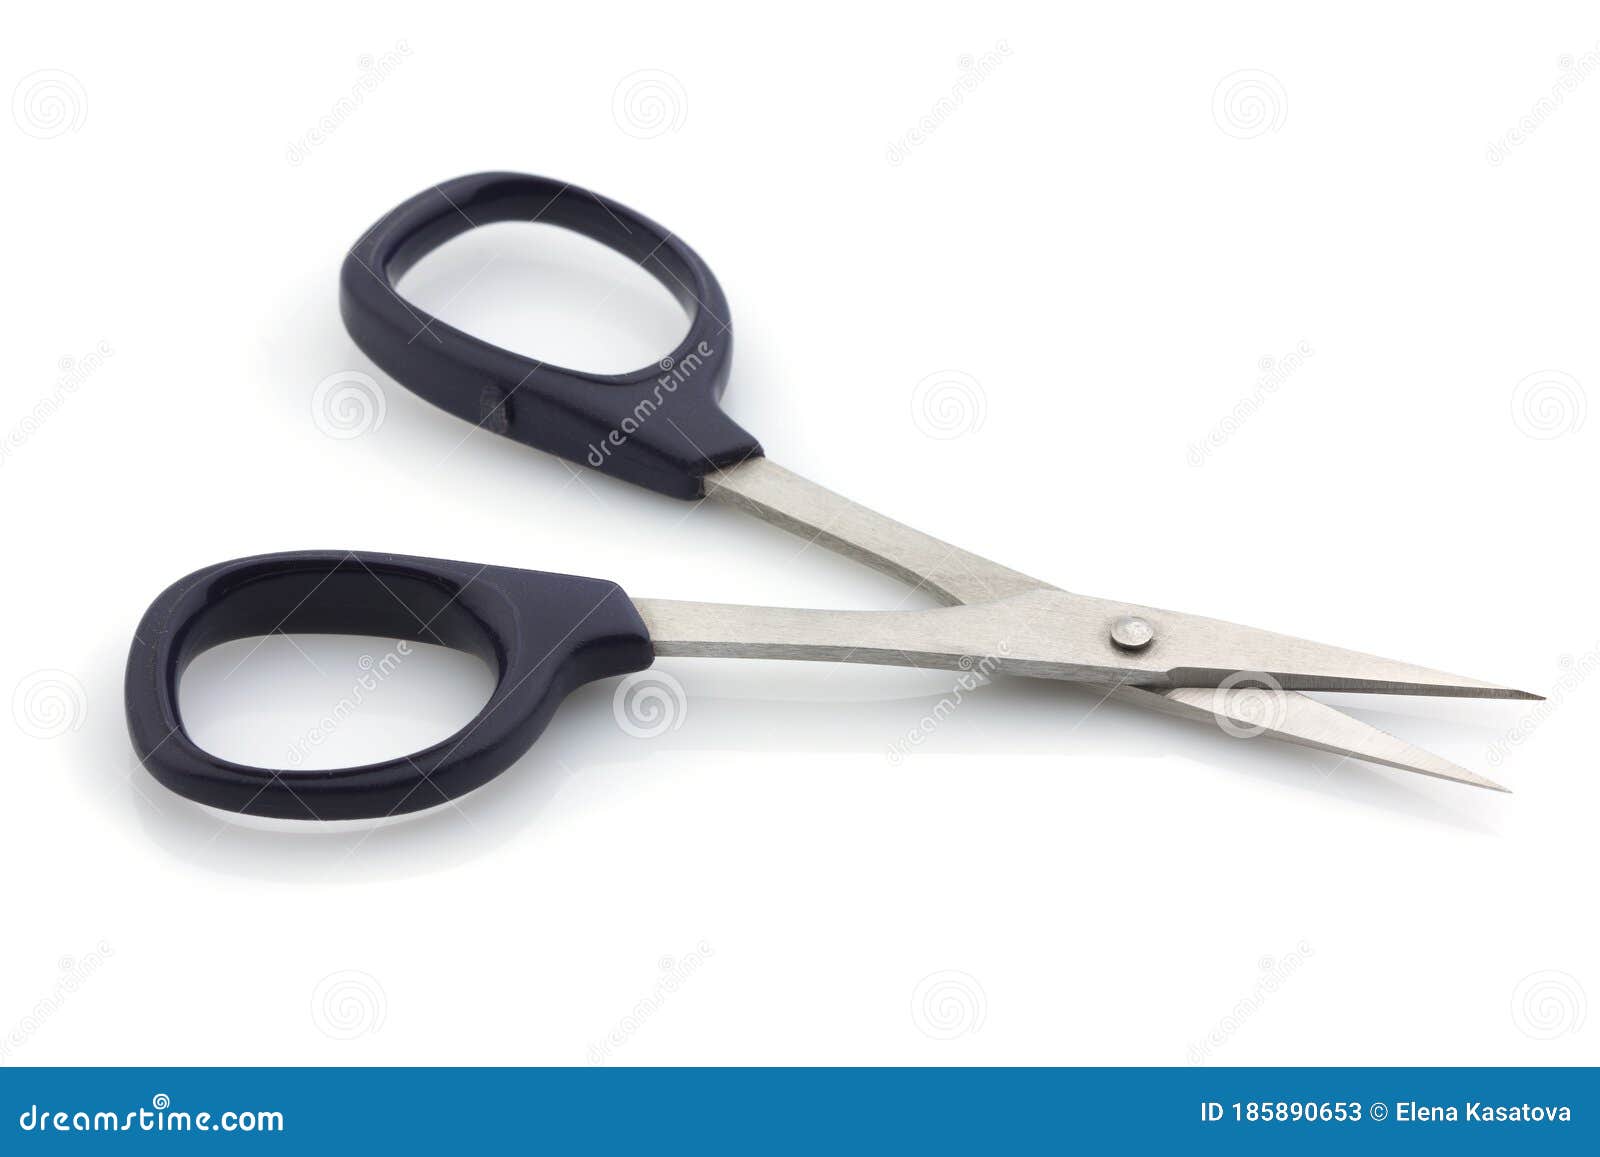 Scissors Small Sharp with Black Handles for Cutting Out Richelieu. Stock  Image - Image of child, blade: 185890653